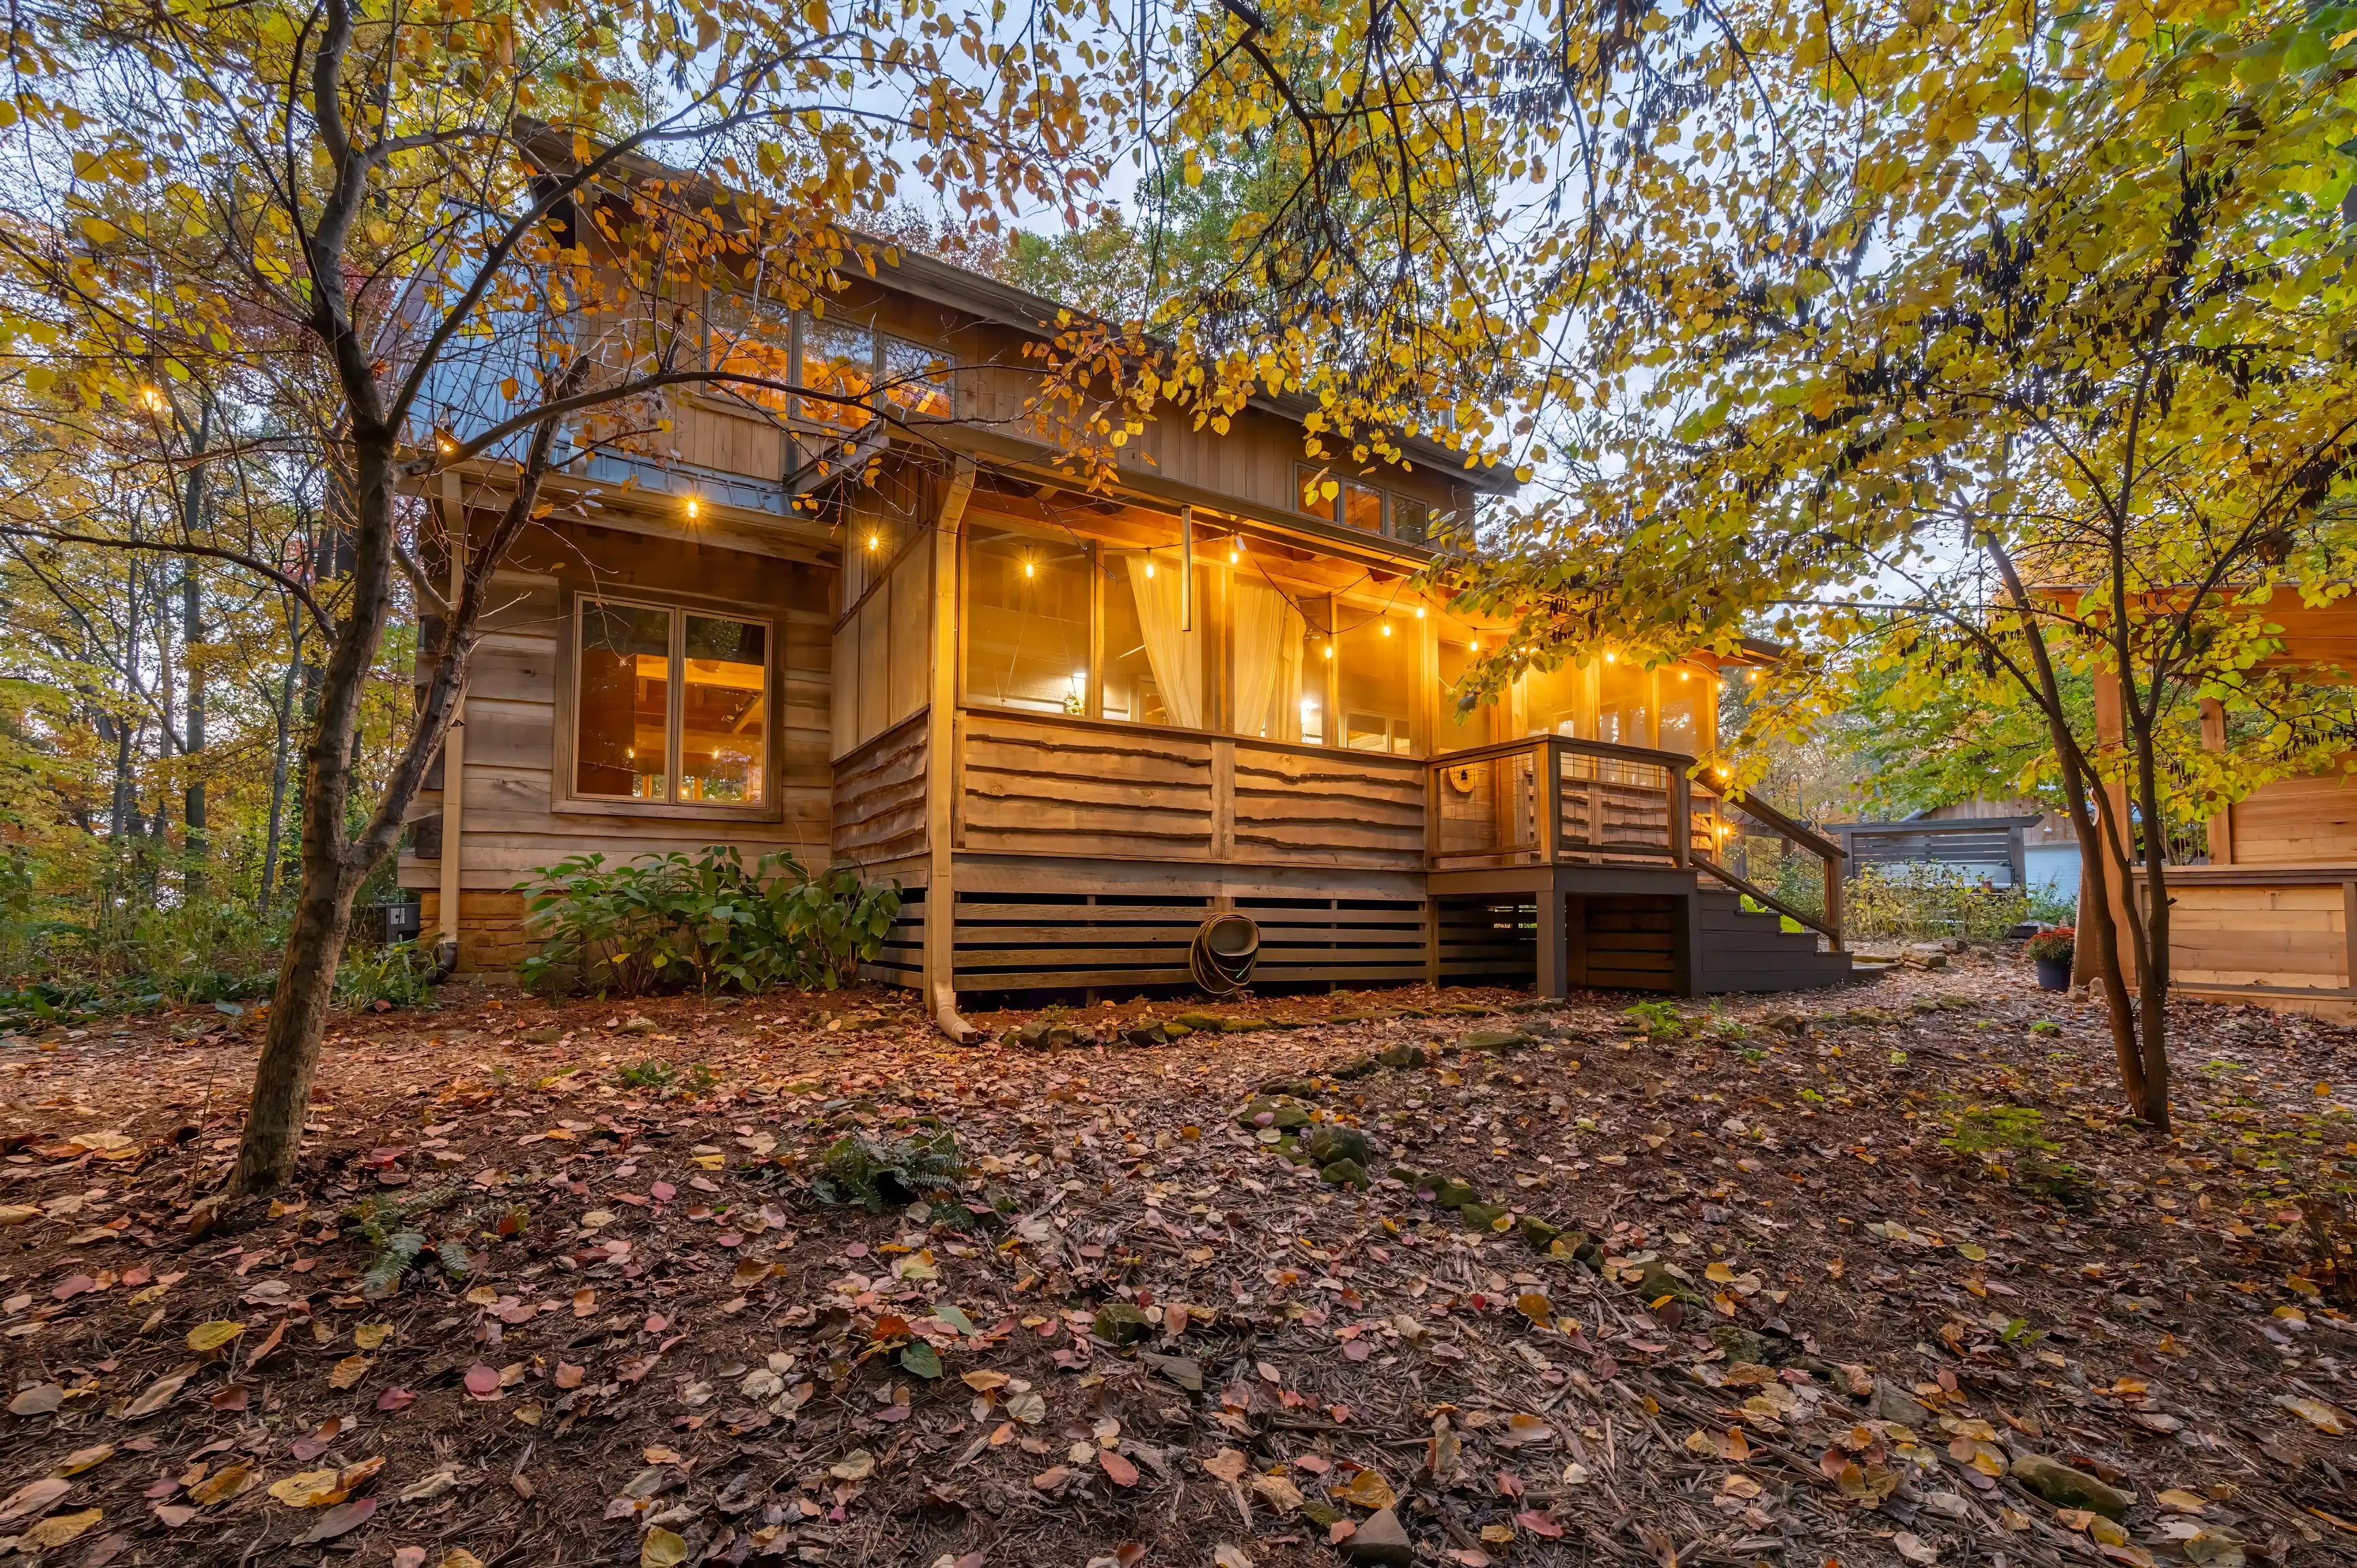 Cozy wooden cabin surrounded by autumn foliage with warm lights on at dusk.